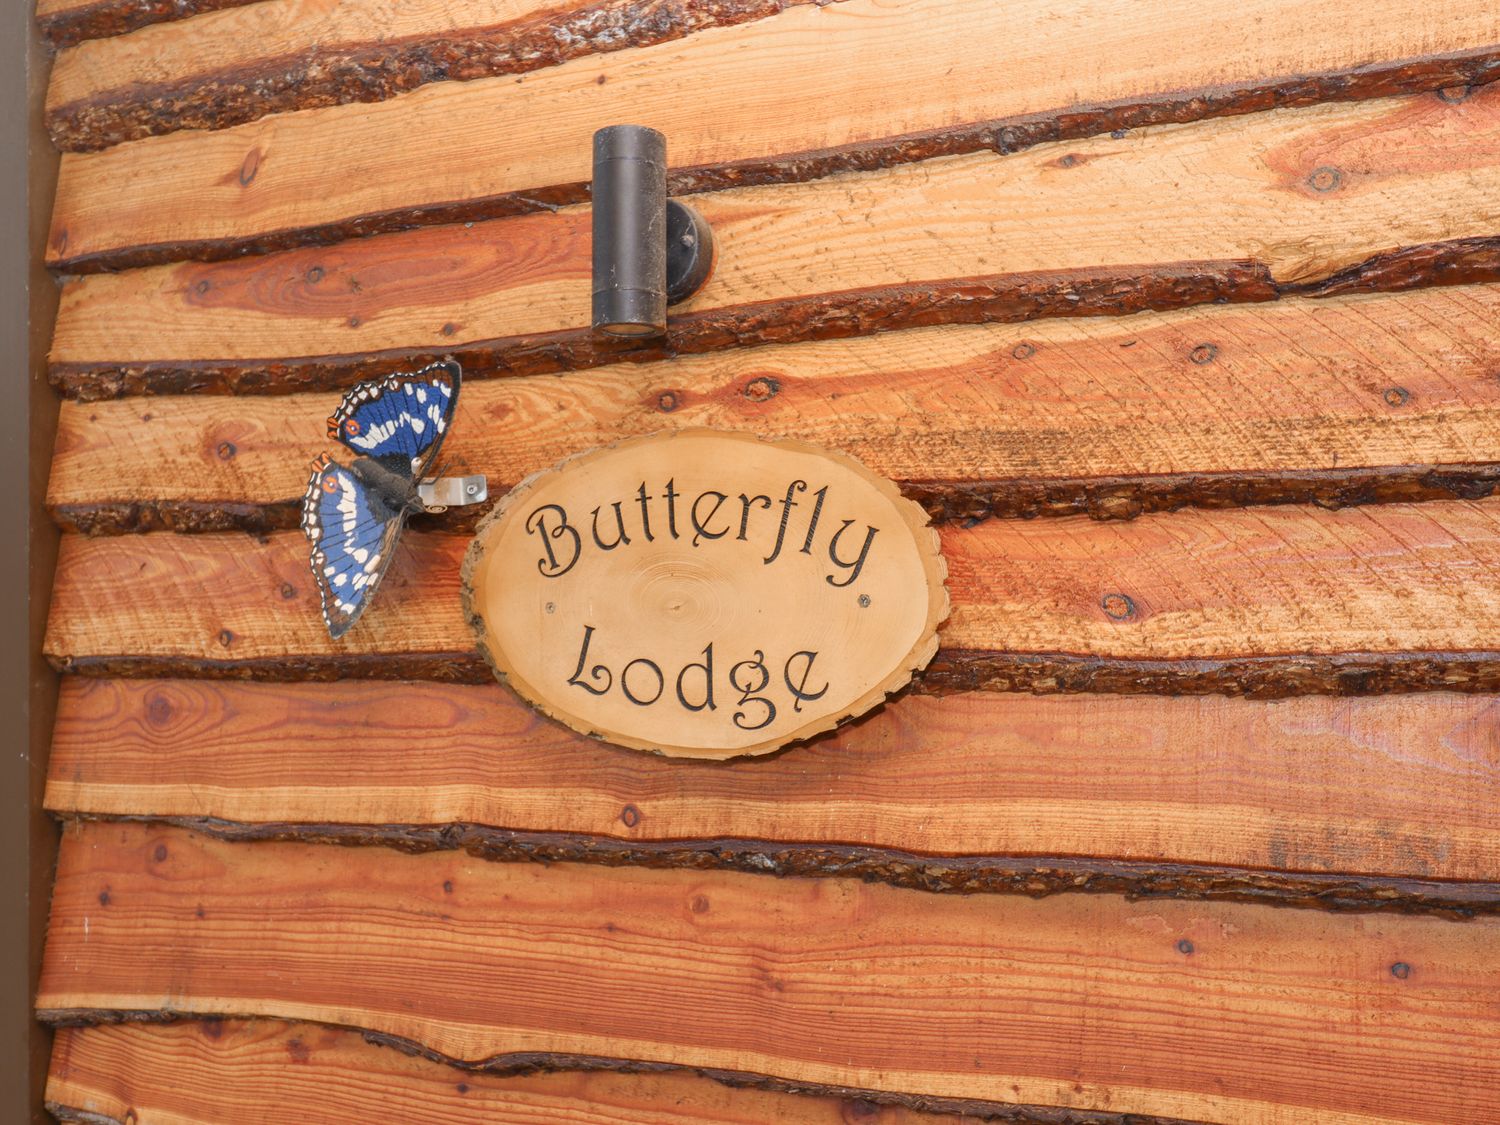 Butterfly Lodge, Thorpe-On-The-Hill